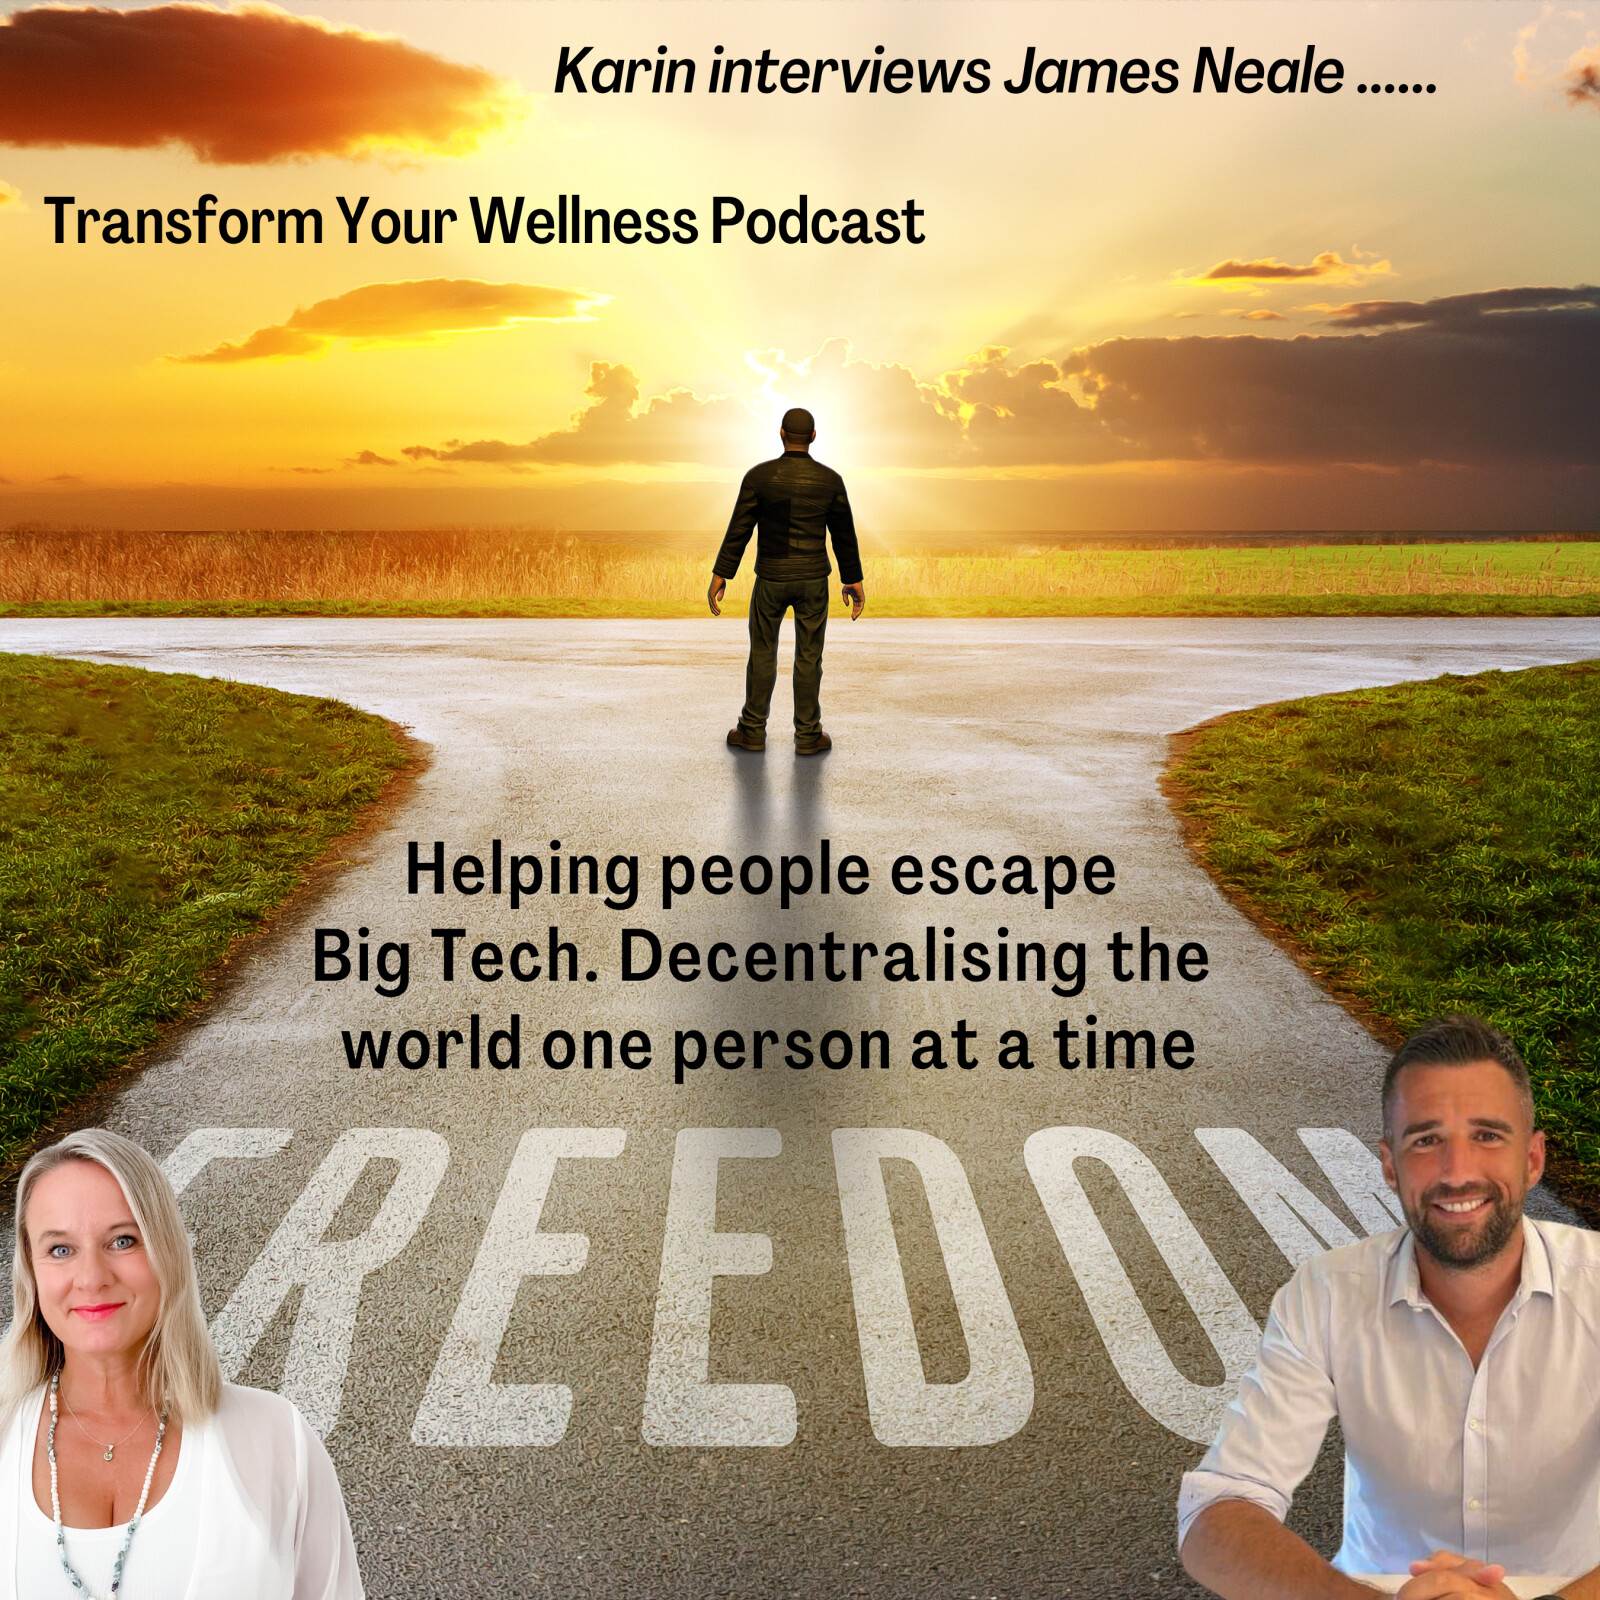 Podcast #19 - Decentralise the world one person at a time